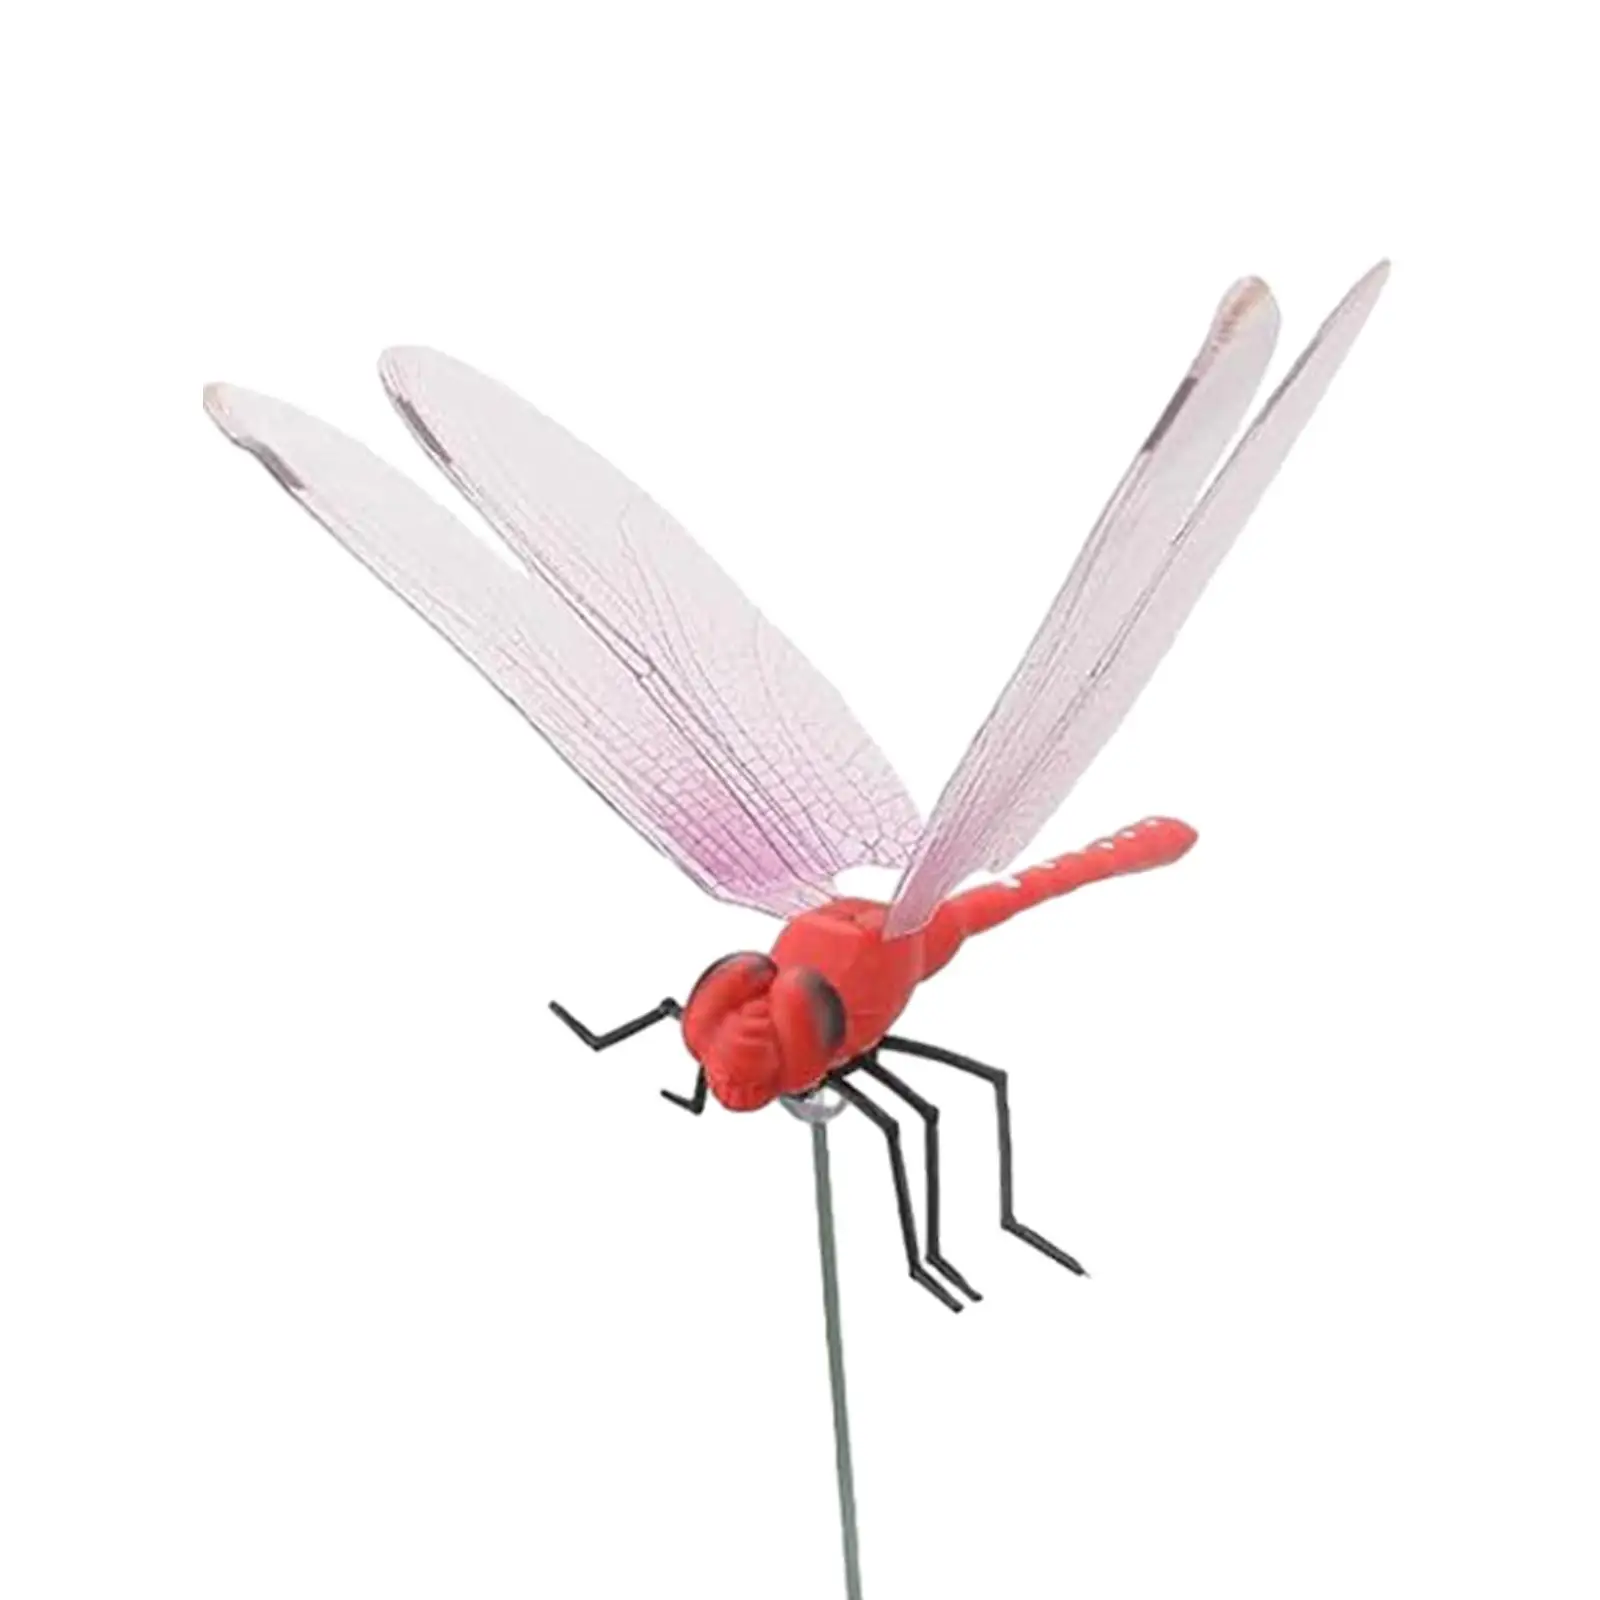 3Pcs Artificial Dragonfly Stakes Gardening Decoration Crafts Fake Dragonfly Clip for Flower Pot Outdoor Garden Indoor Planter